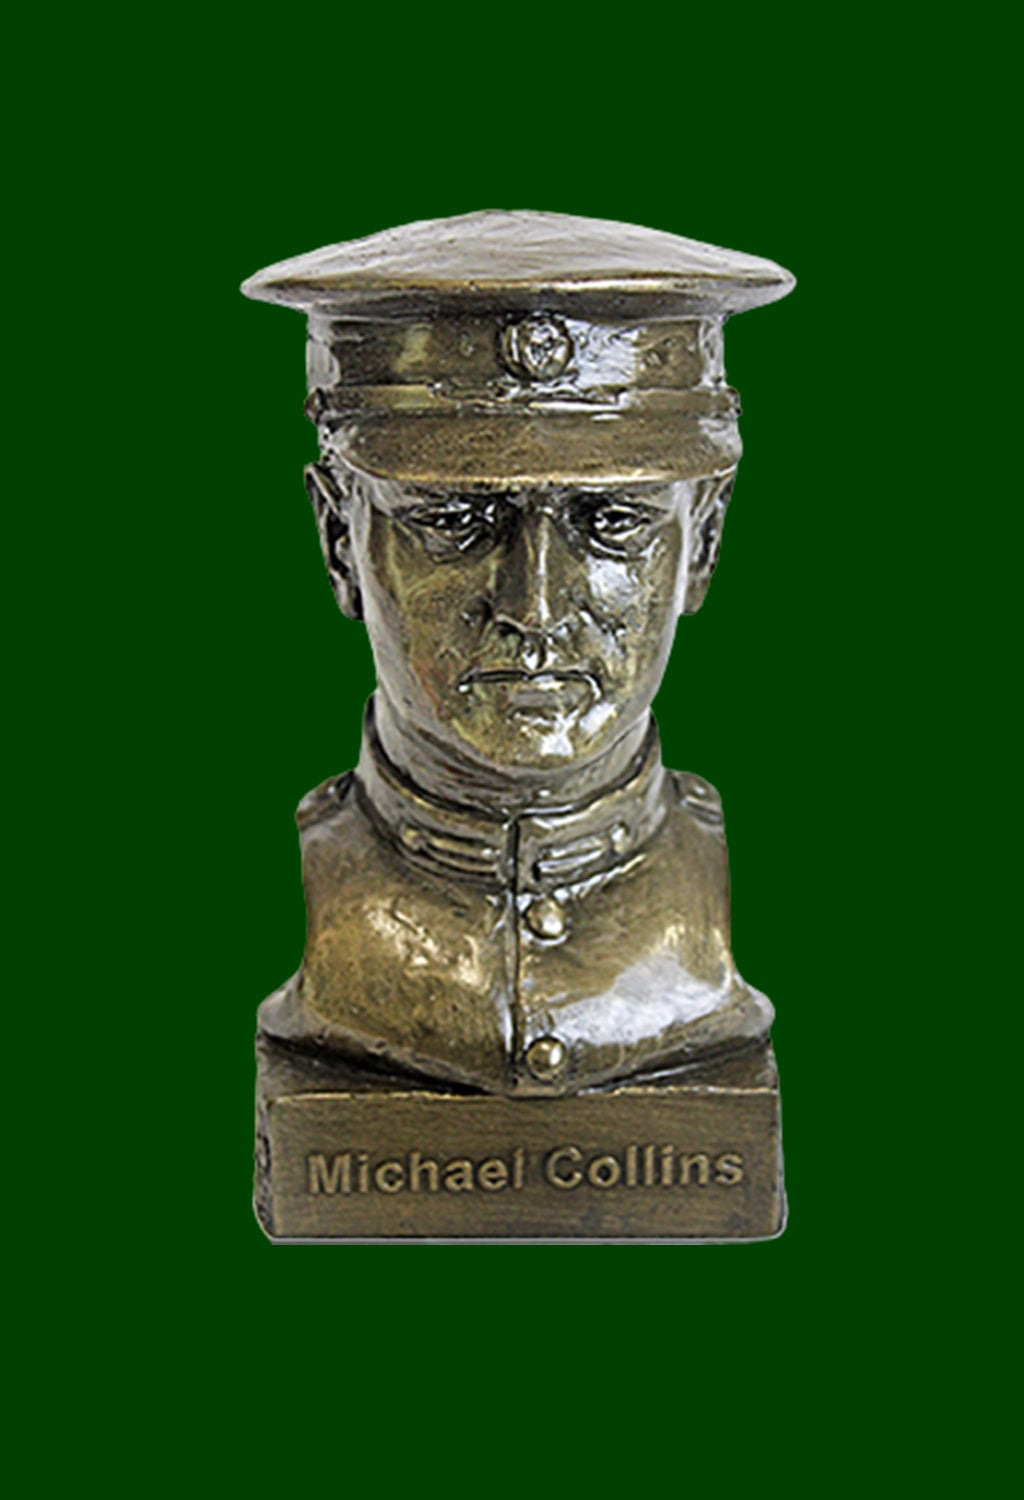 General Michael Collins Bust